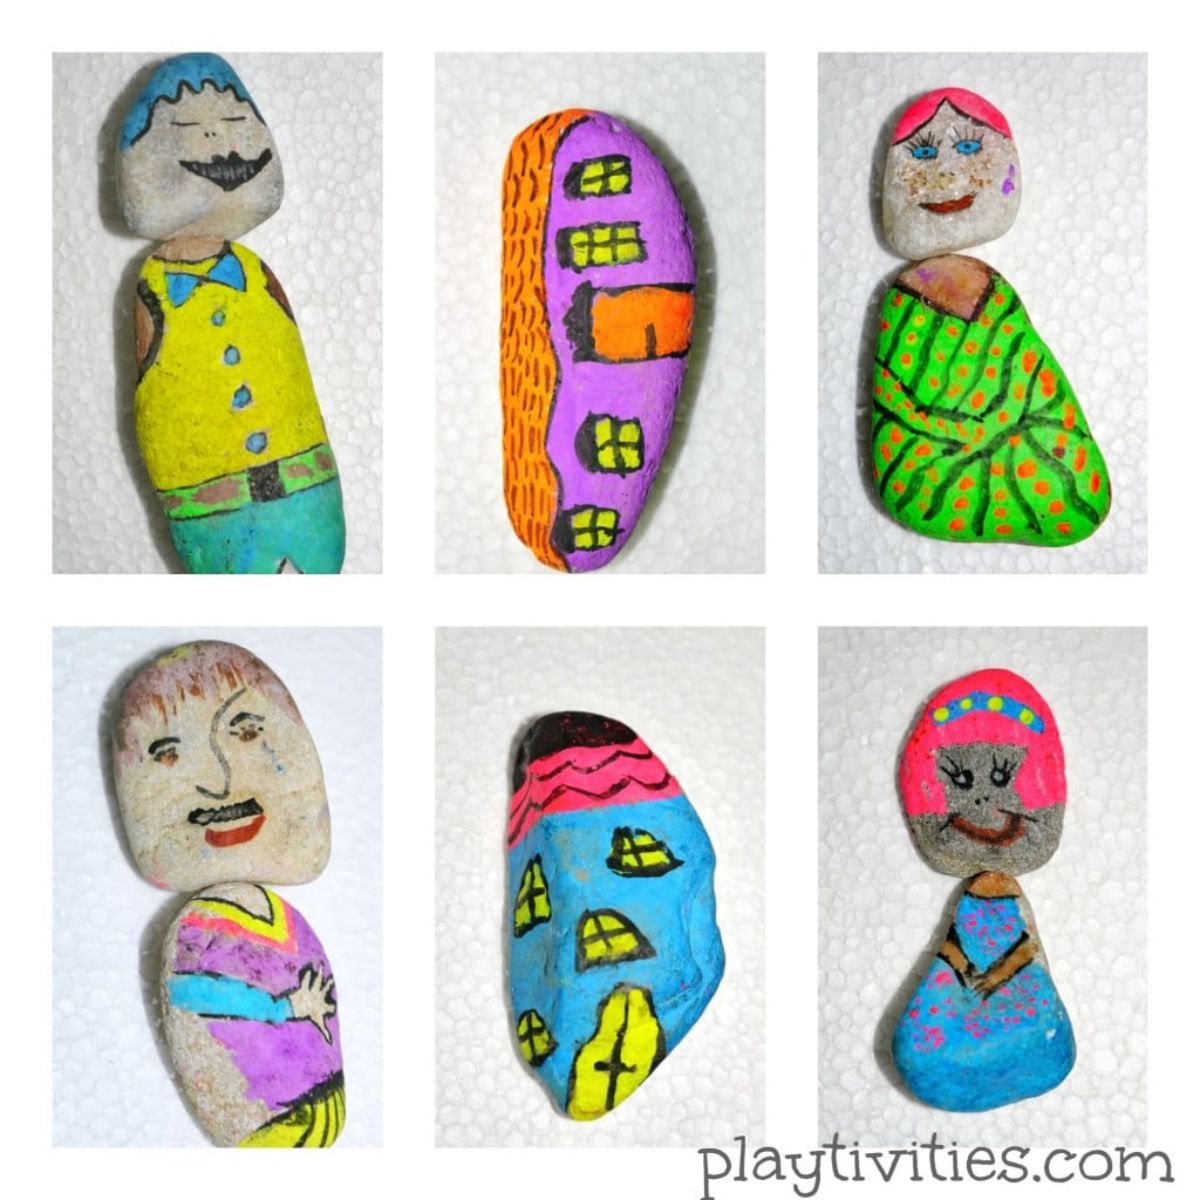 6 images of painted rocks.